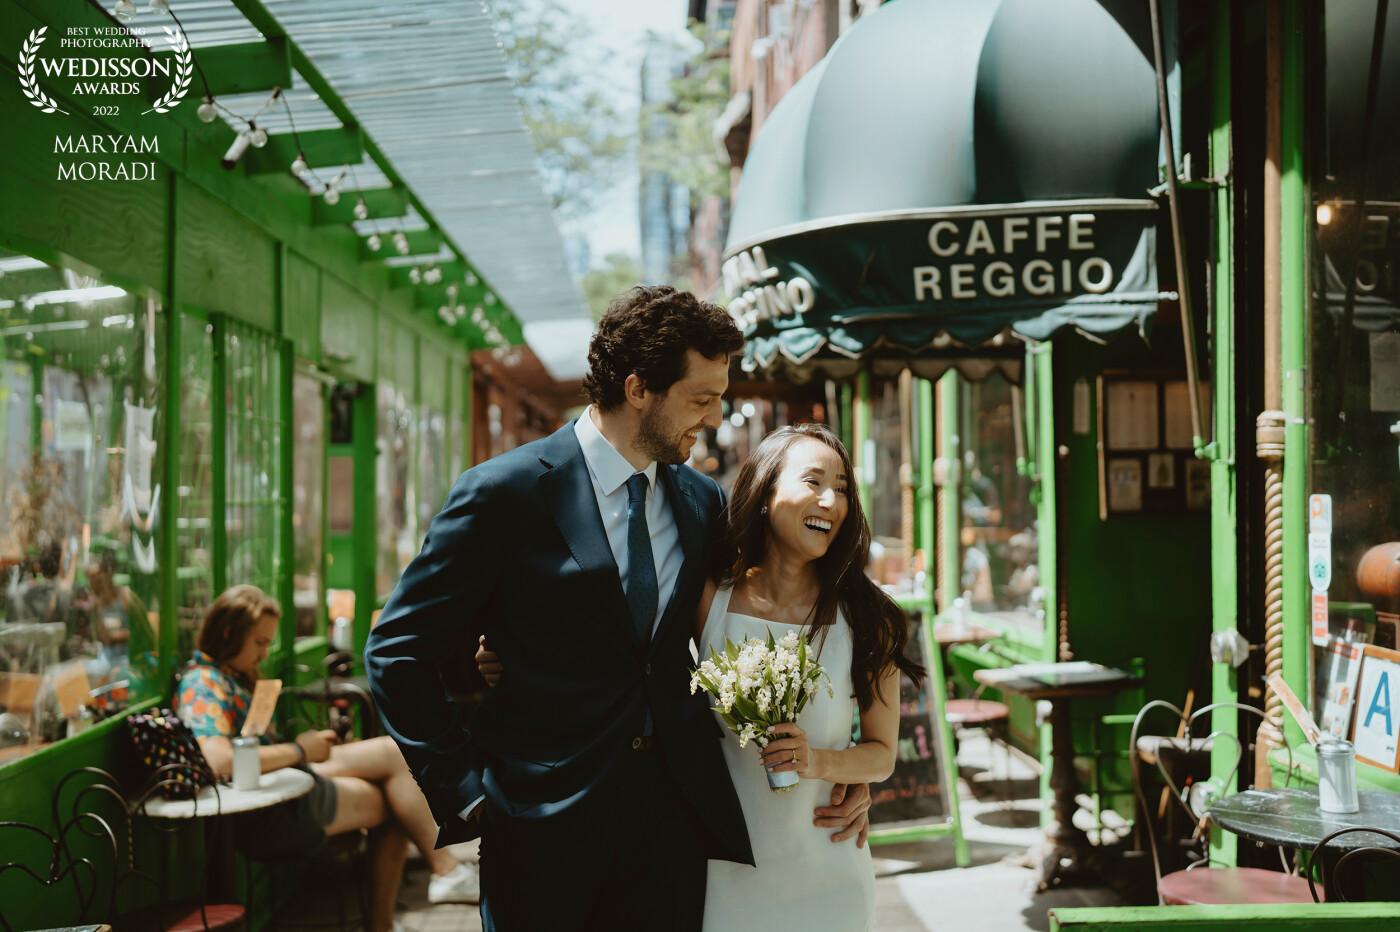 The Green Romance in the City <br />
West Village always is my favorite spot for wedding photography.<br />
@marymor_photography <br />
New York City, US